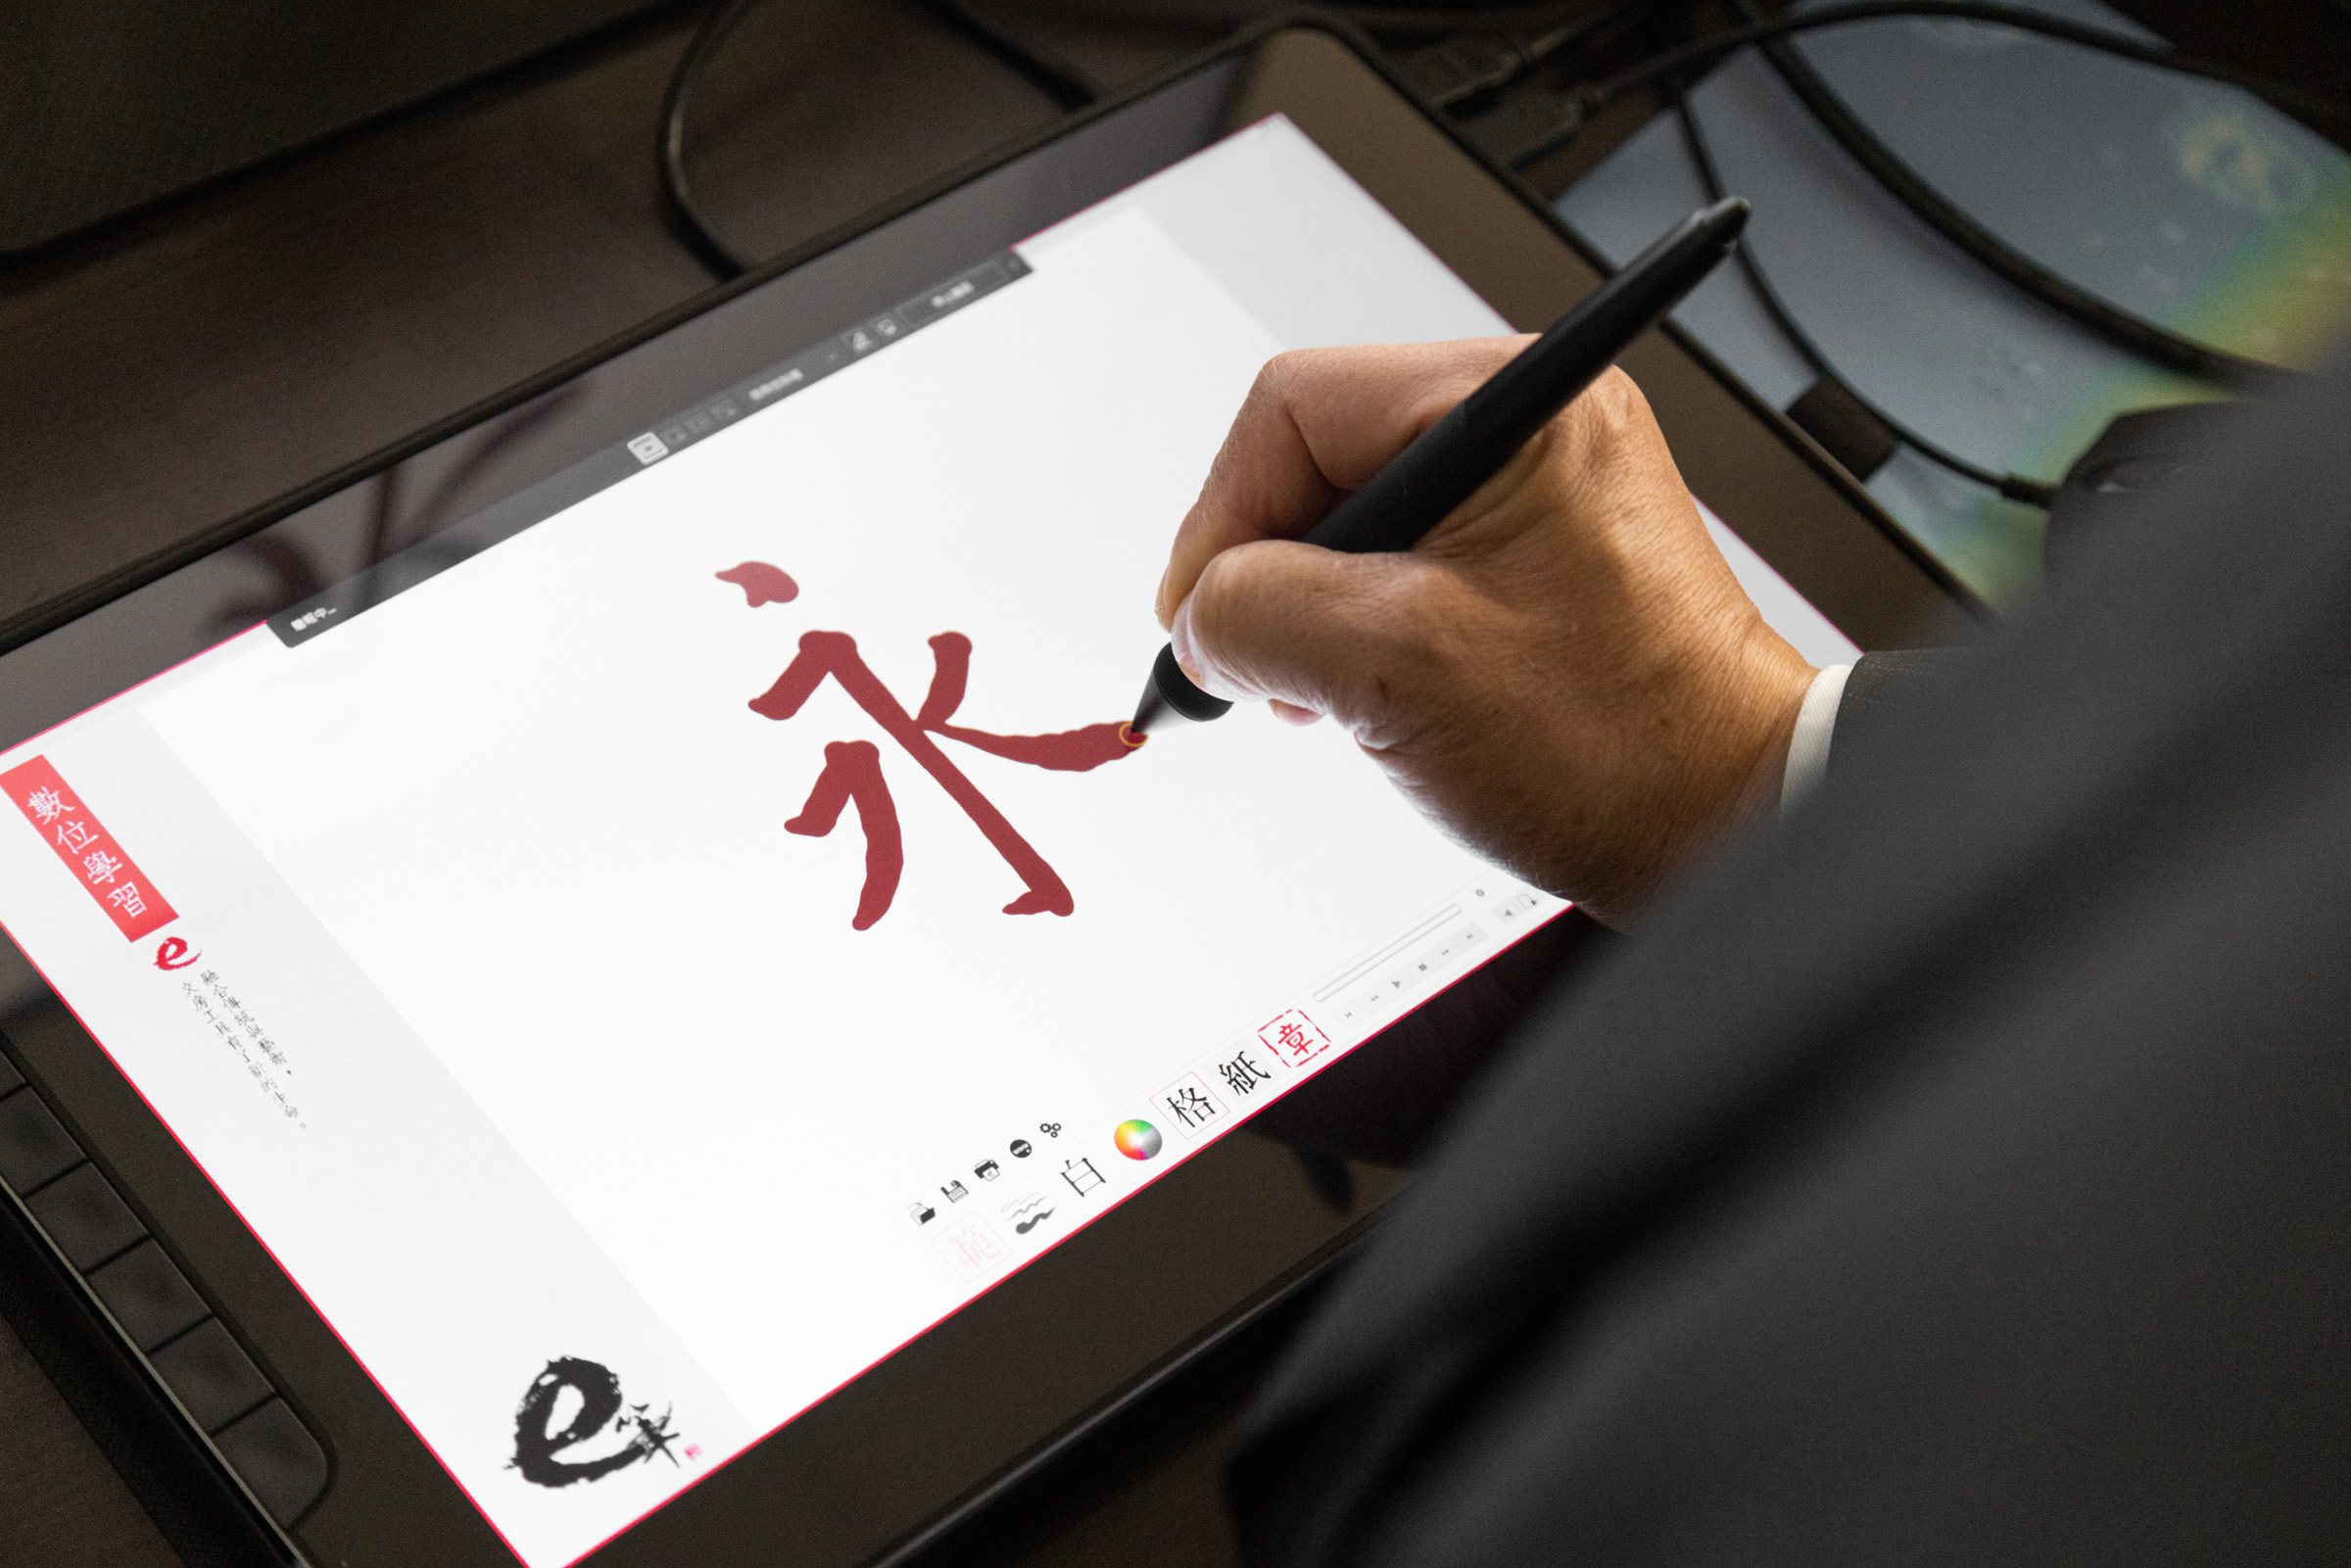 Tamkang University collaborate with ViewSonic and create a total solution together that seamlessly integrates hardware and software, ViewSonic’s ID1330 ViewBoard Pen Display allows students’ caligraphy to be digitally preserved and easily shared through social media.